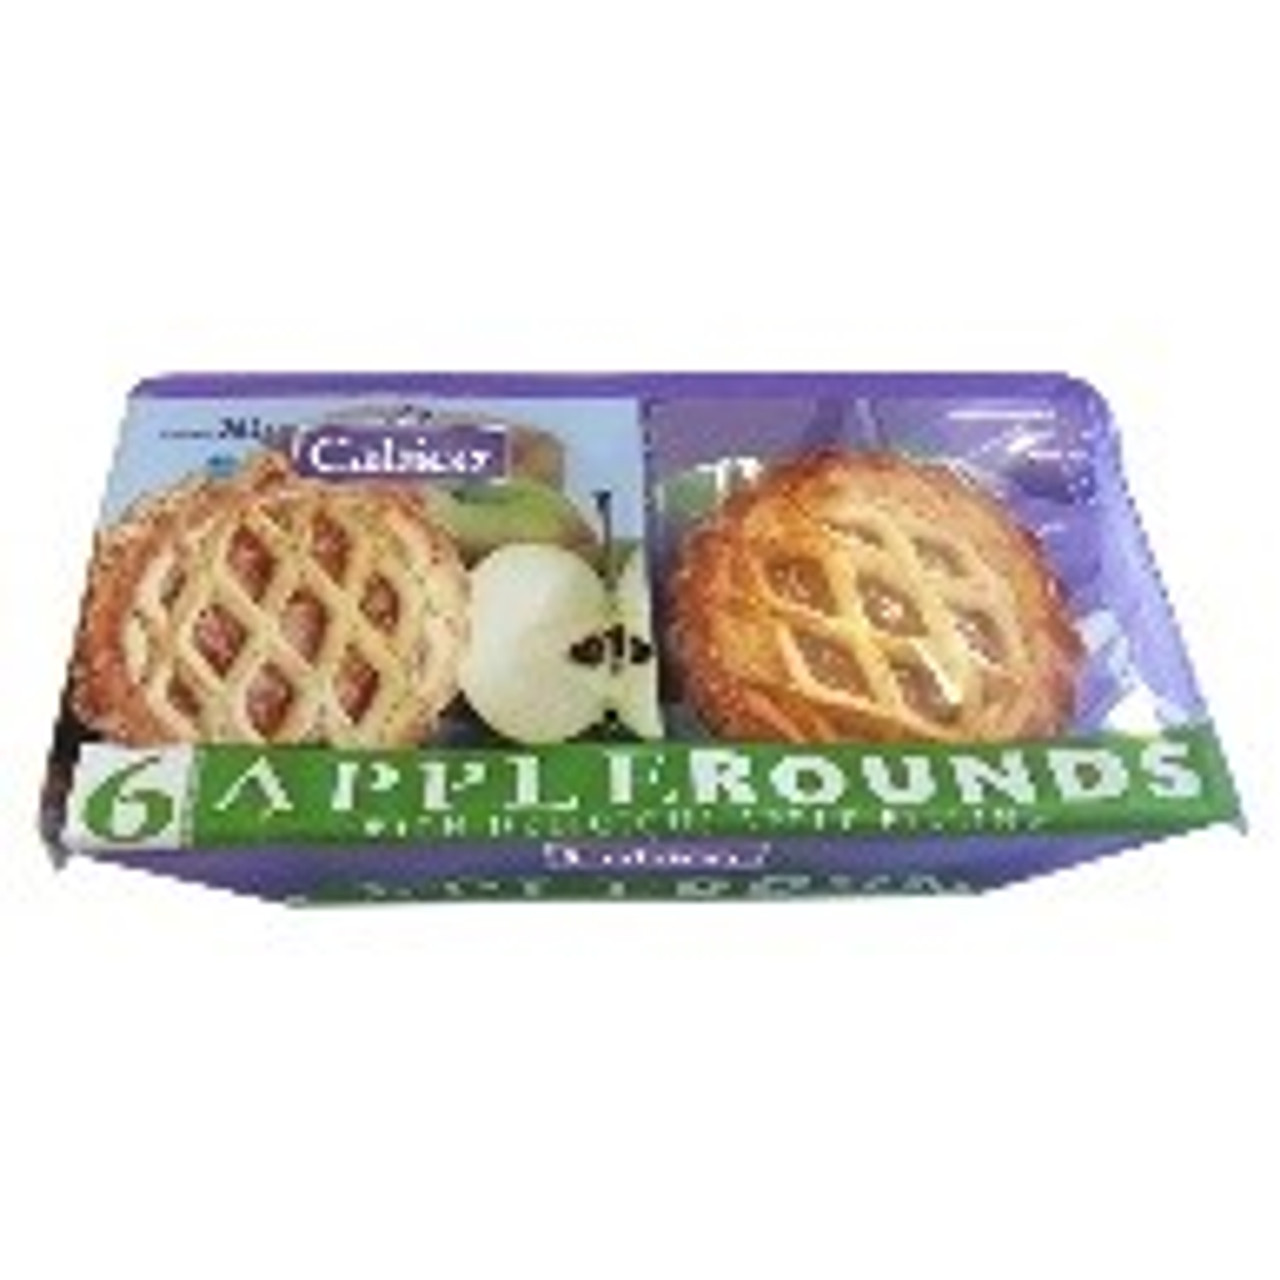 Cabico 6 Apple Rounds 264g (Aug - Oct 23) RRP £1.79 CLEARANCE XL £0.89 or 2 for £1.50